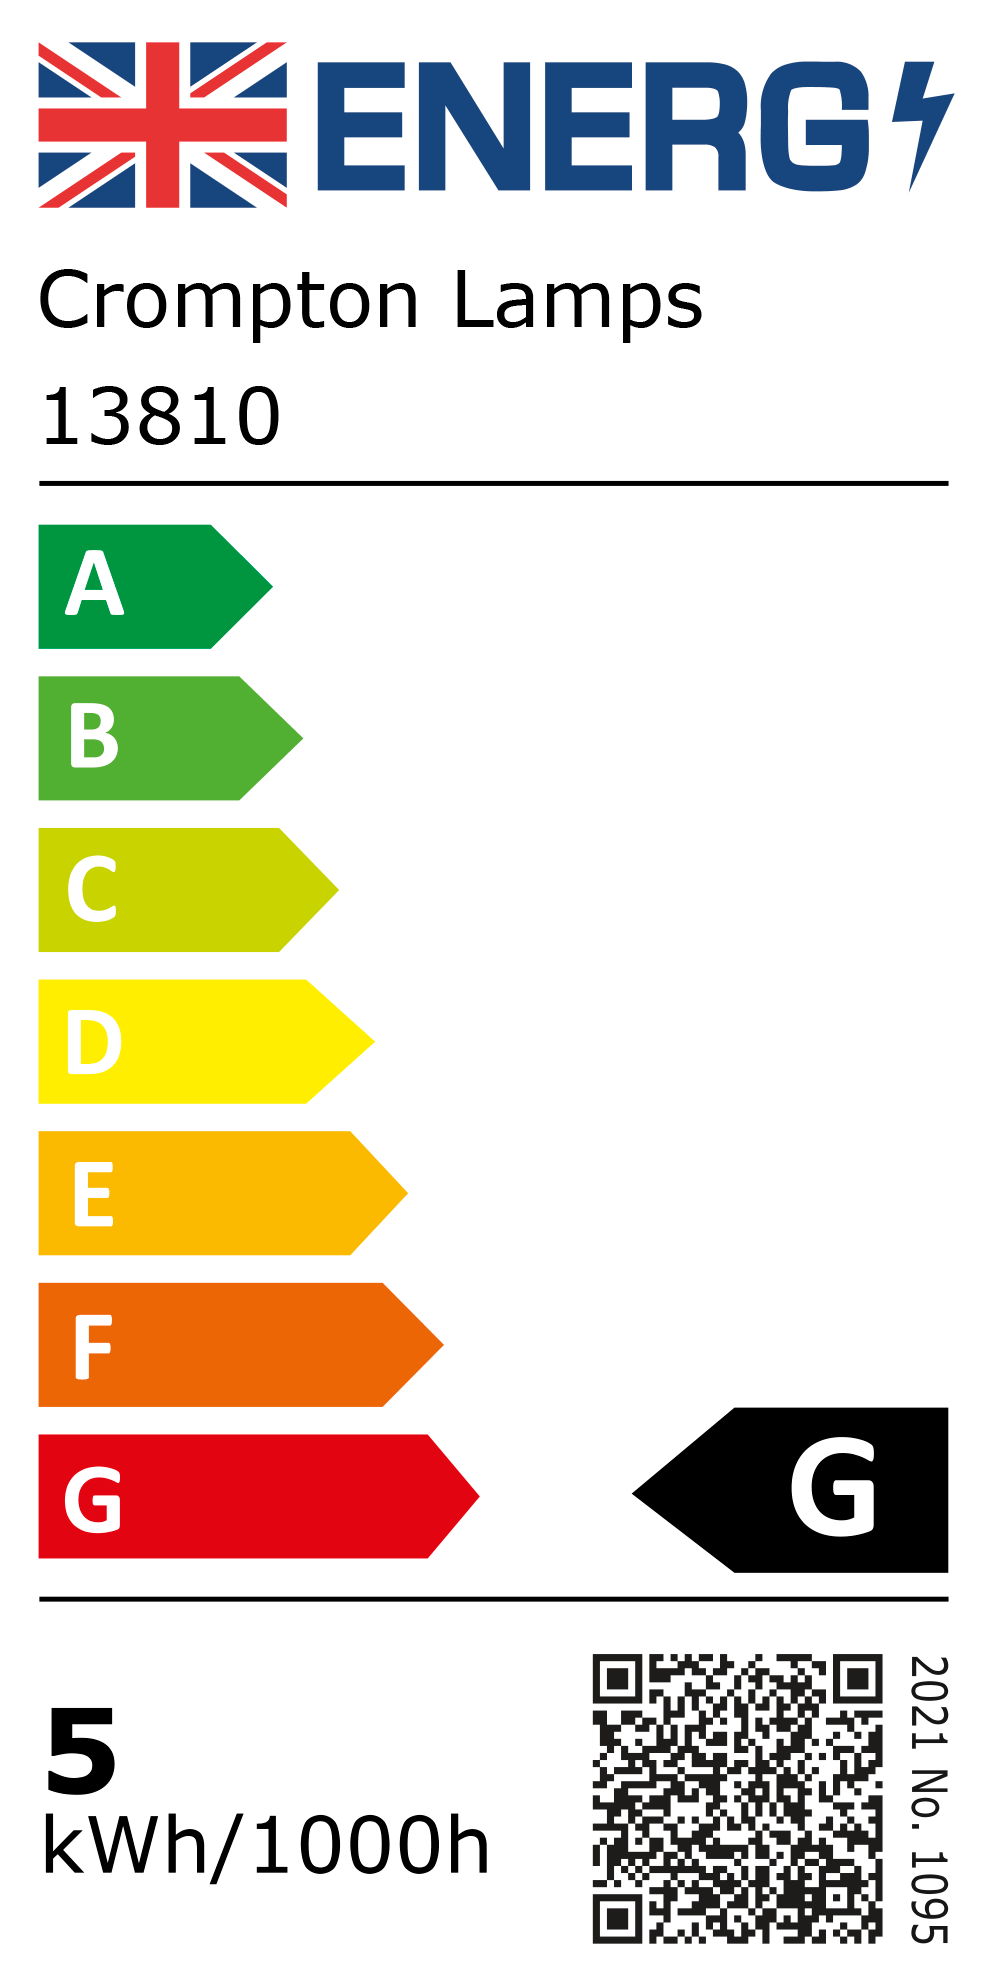 New 2021 Energy Rating Label: Stock Code 13810